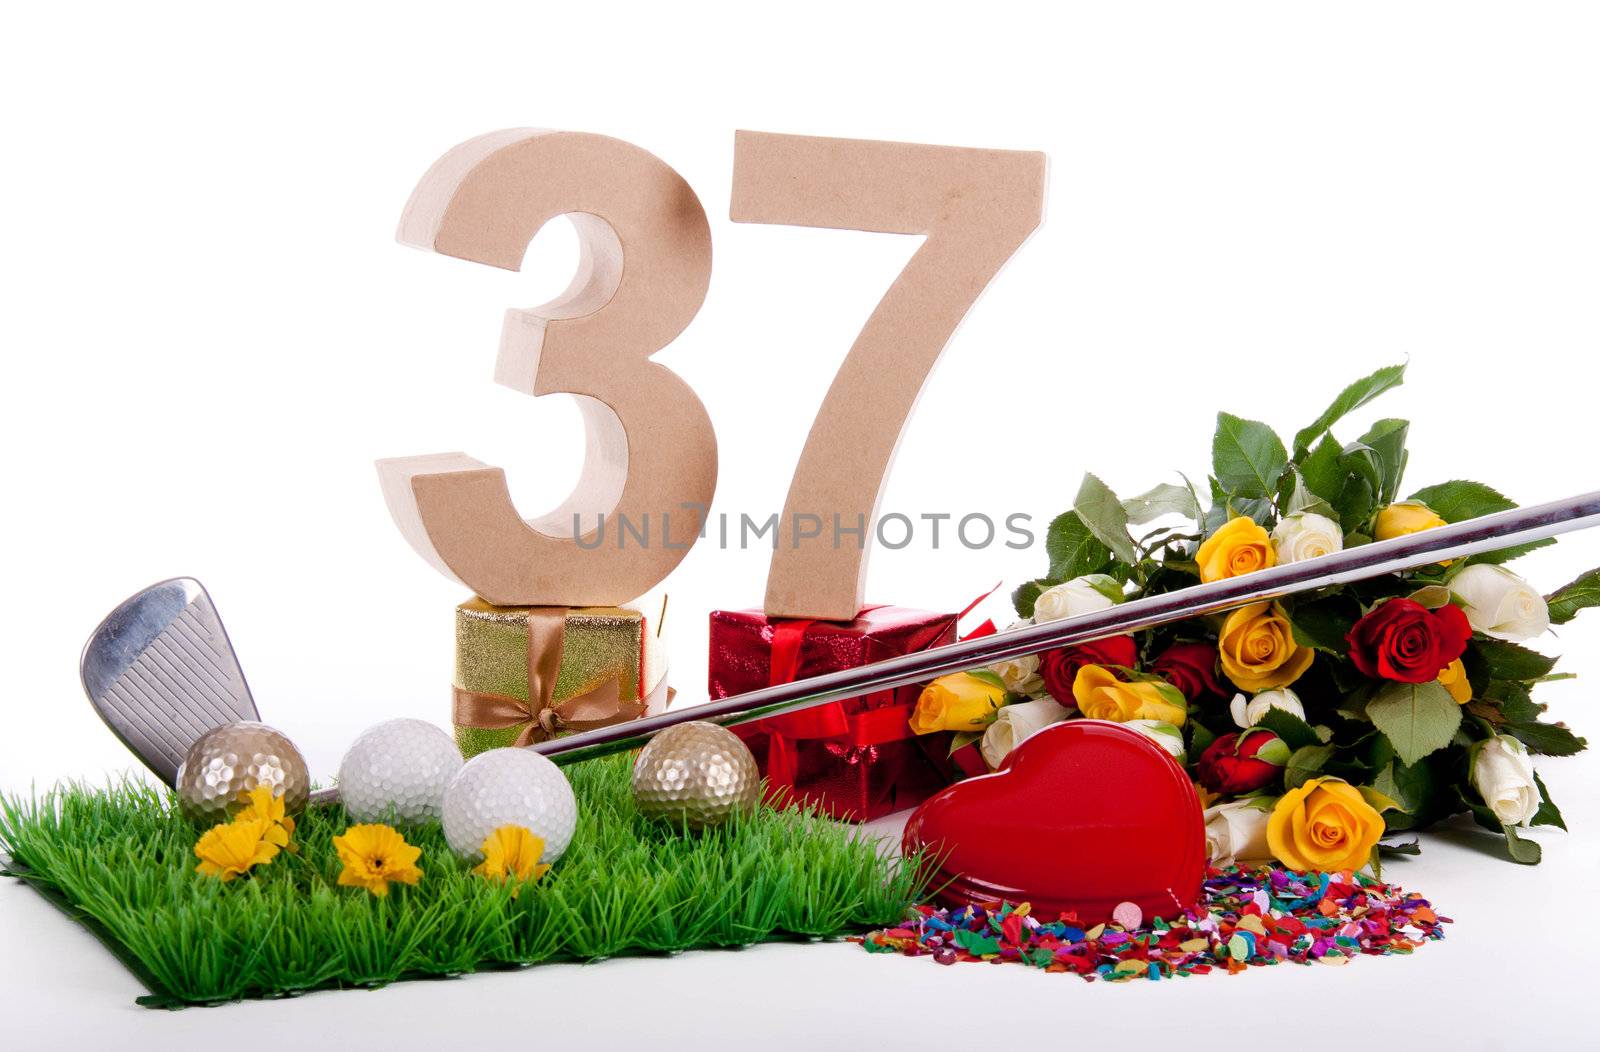 Roses, a golf club and golf balls on an artificial peace of grass to be used as a birthday card